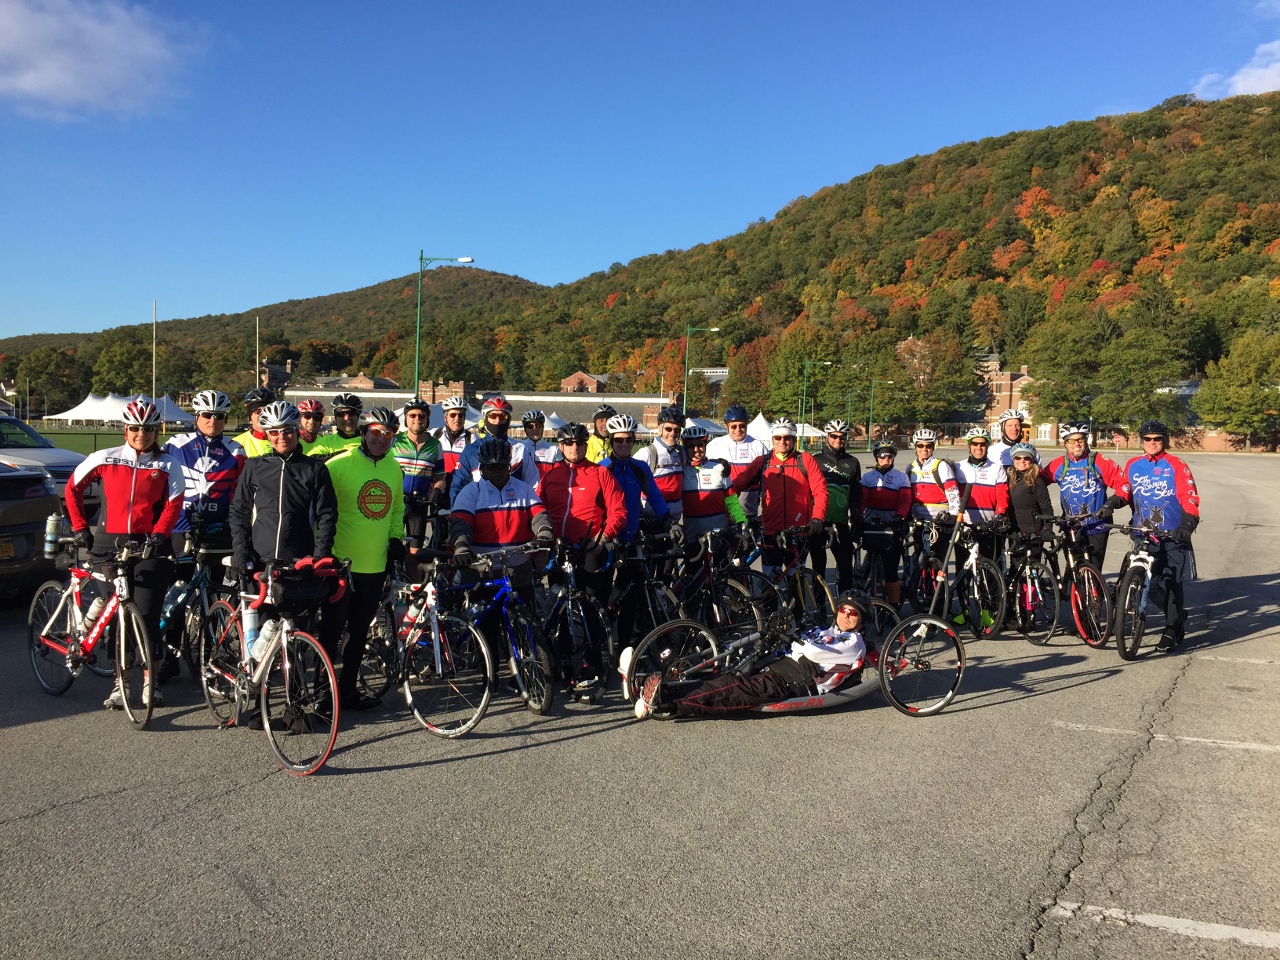 Riders prepare for the start of Face of America Liberty in West Point, New York October 18. Photograph by Van Brinson.